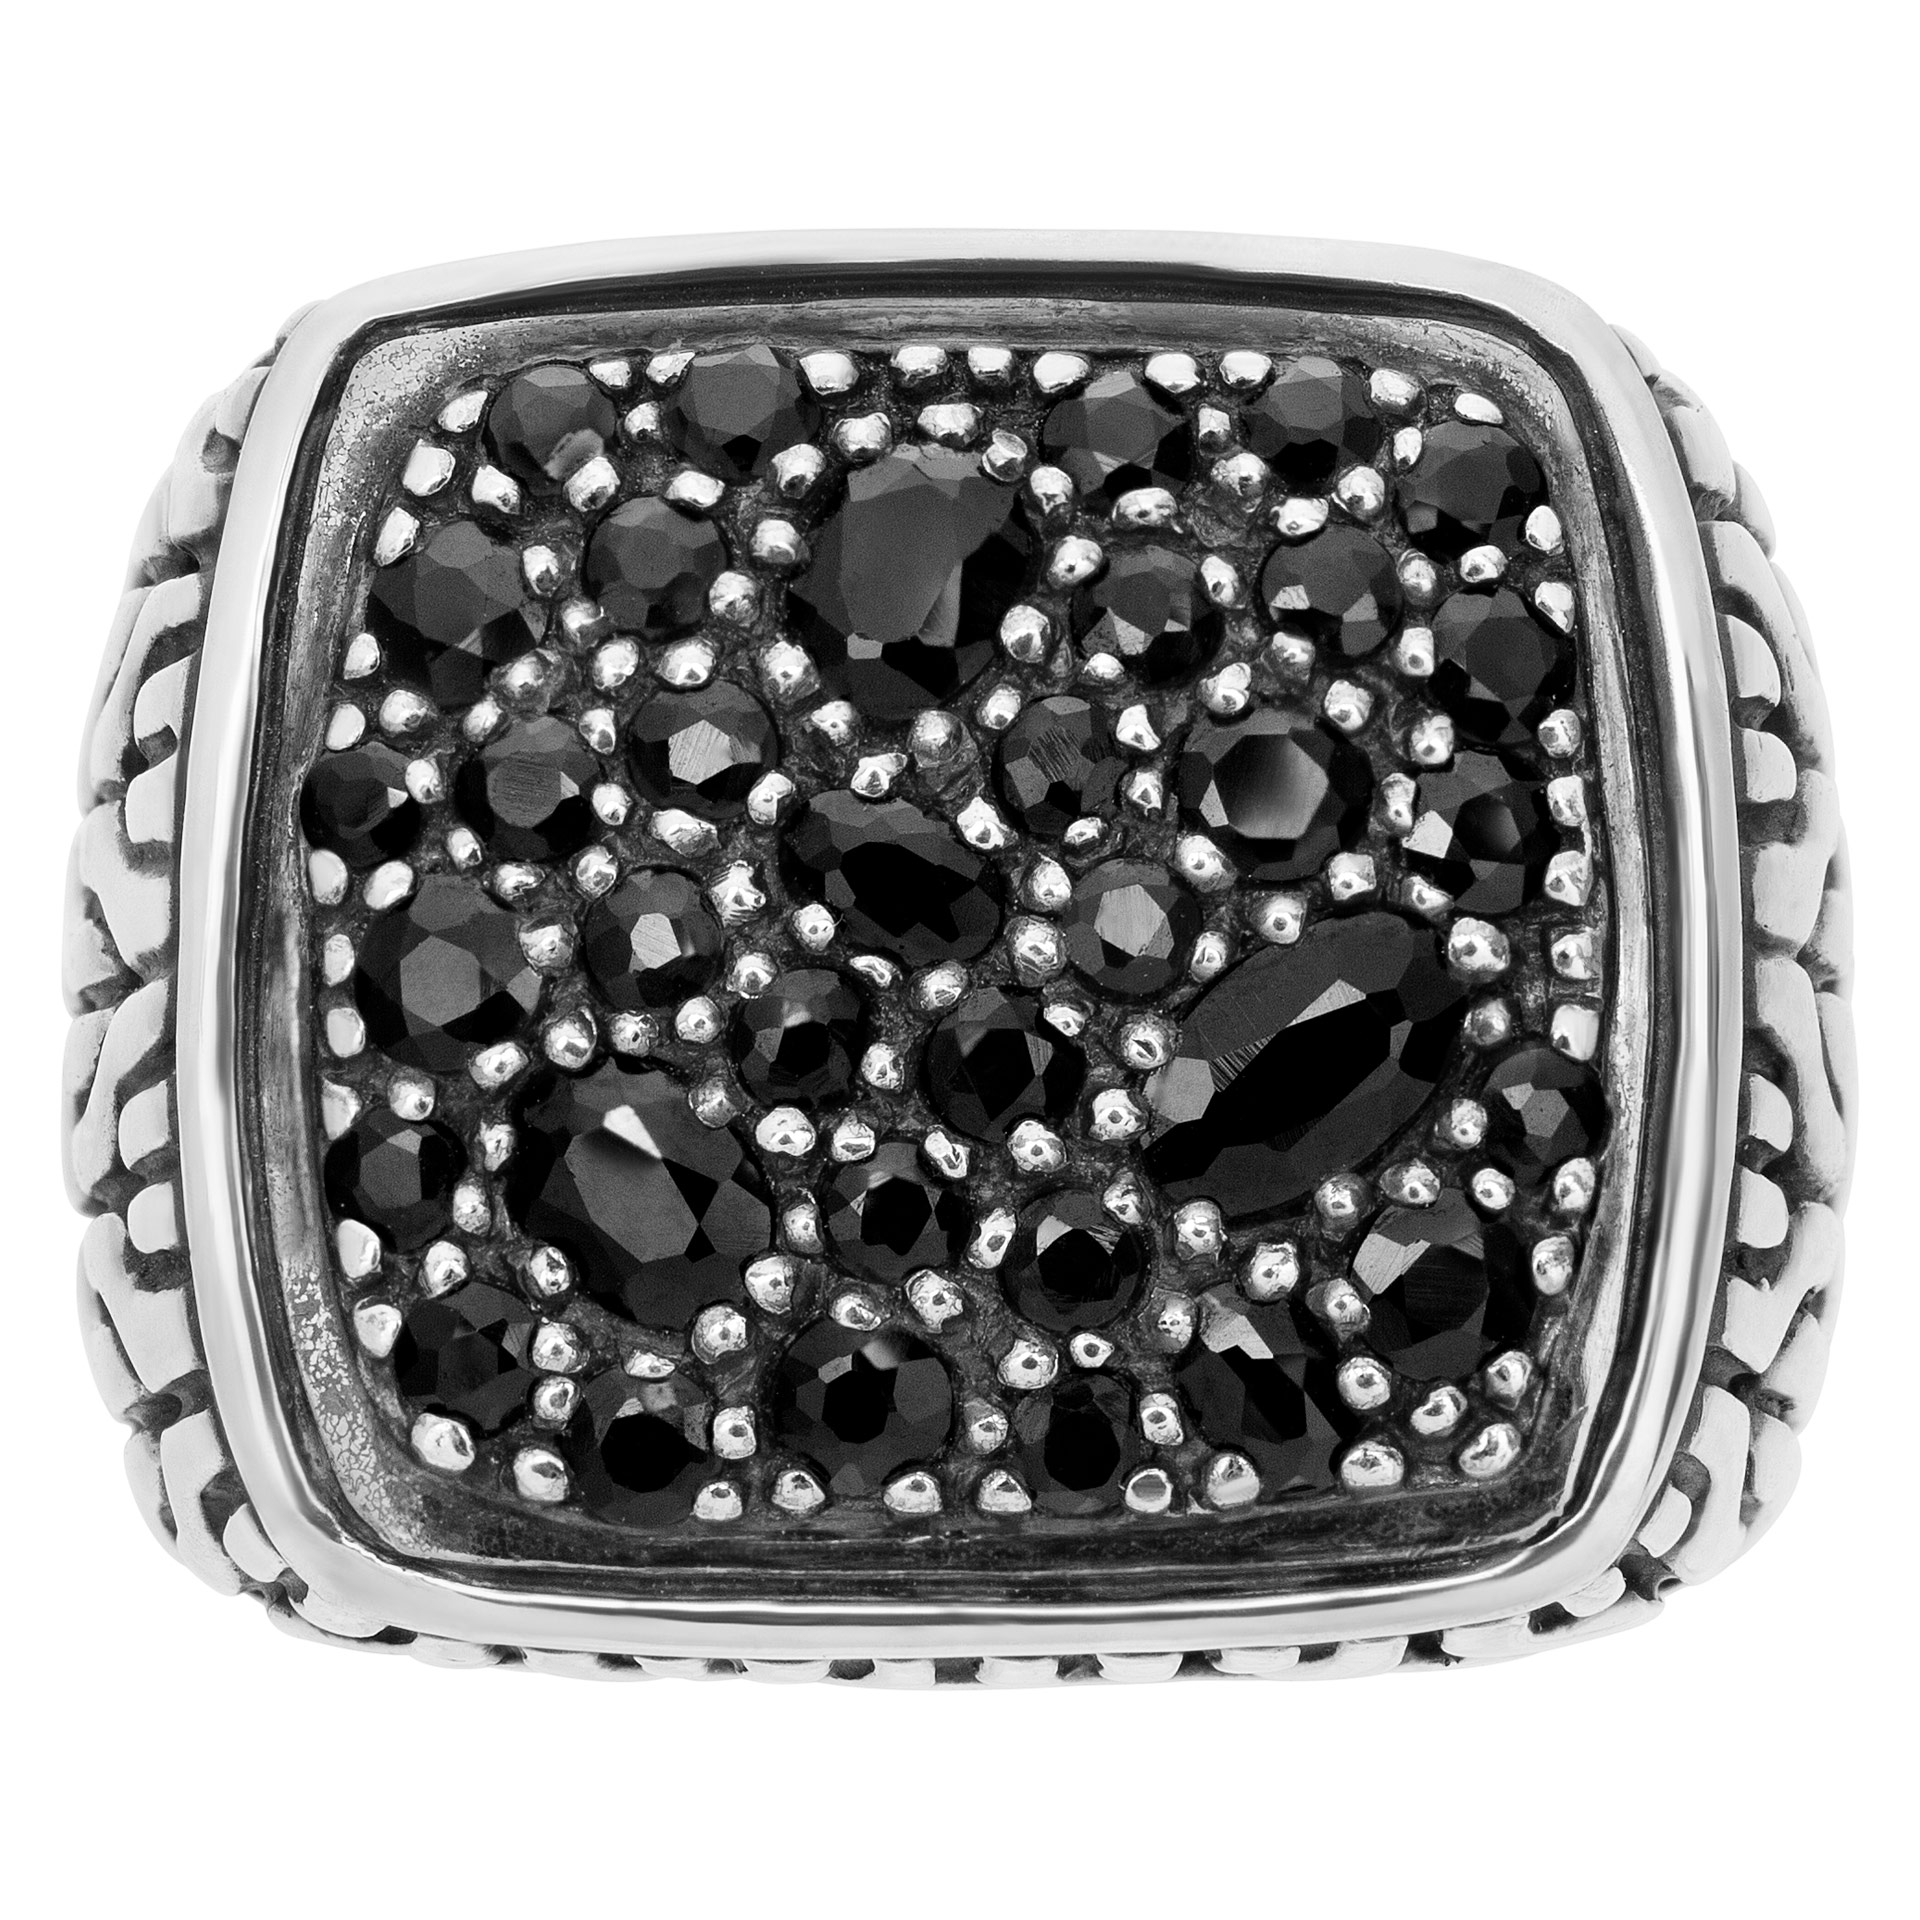 John Hardy classic chain black sapphire signet ring in sterling silver